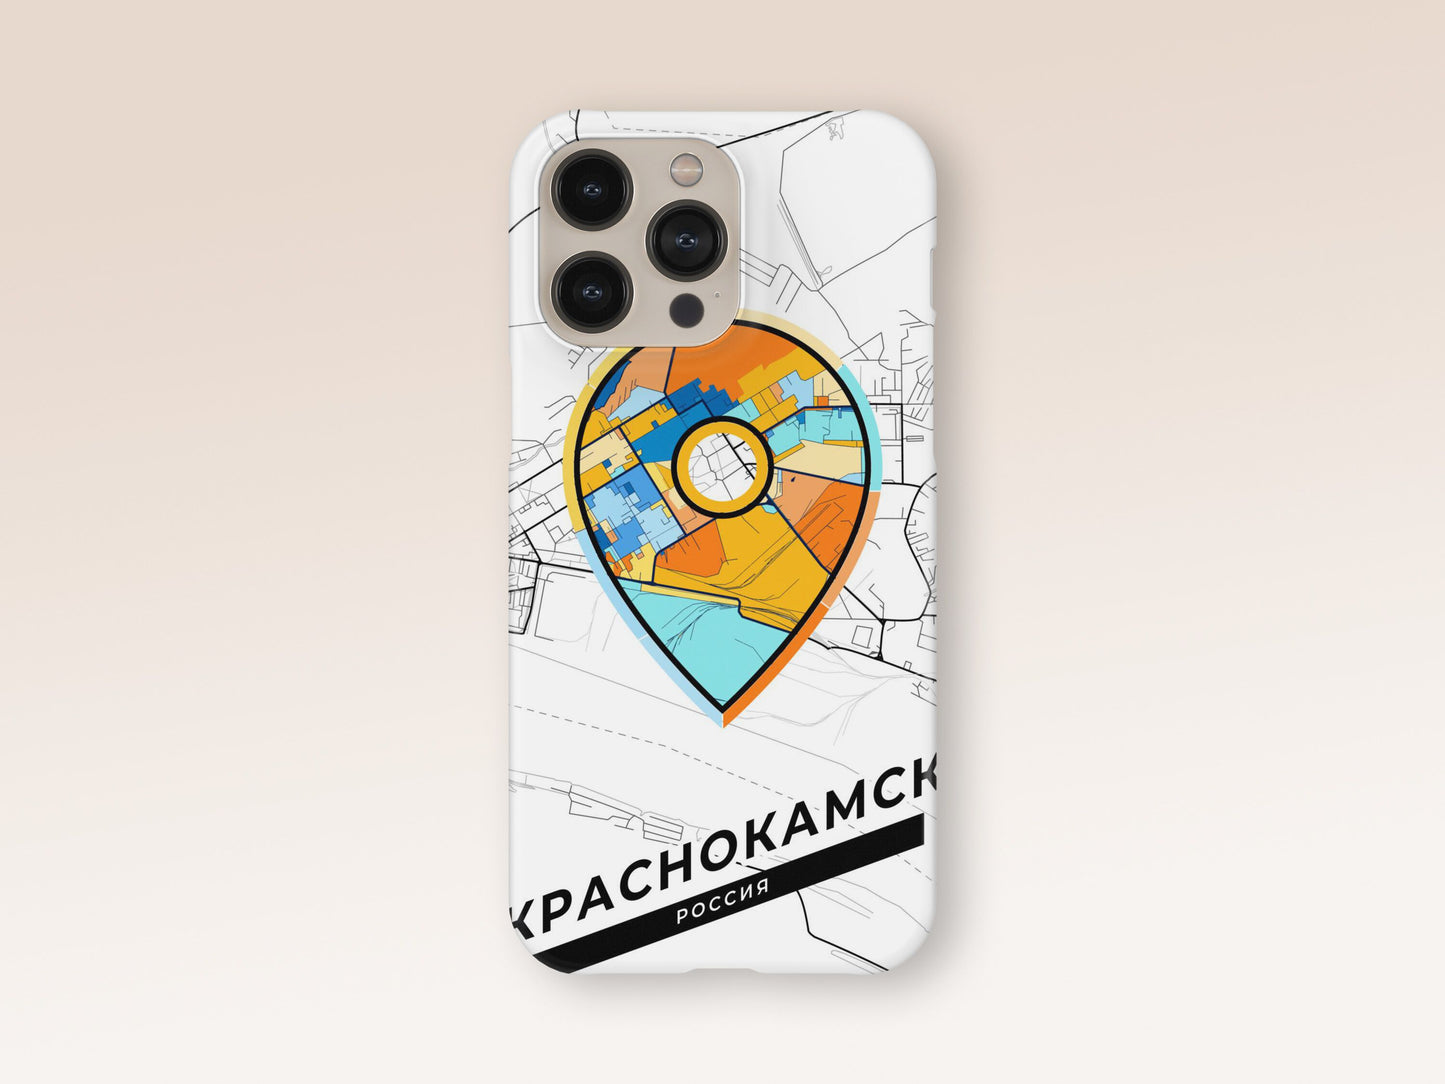 Krasnokamsk Russia slim phone case with colorful icon. Birthday, wedding or housewarming gift. Couple match cases. 1